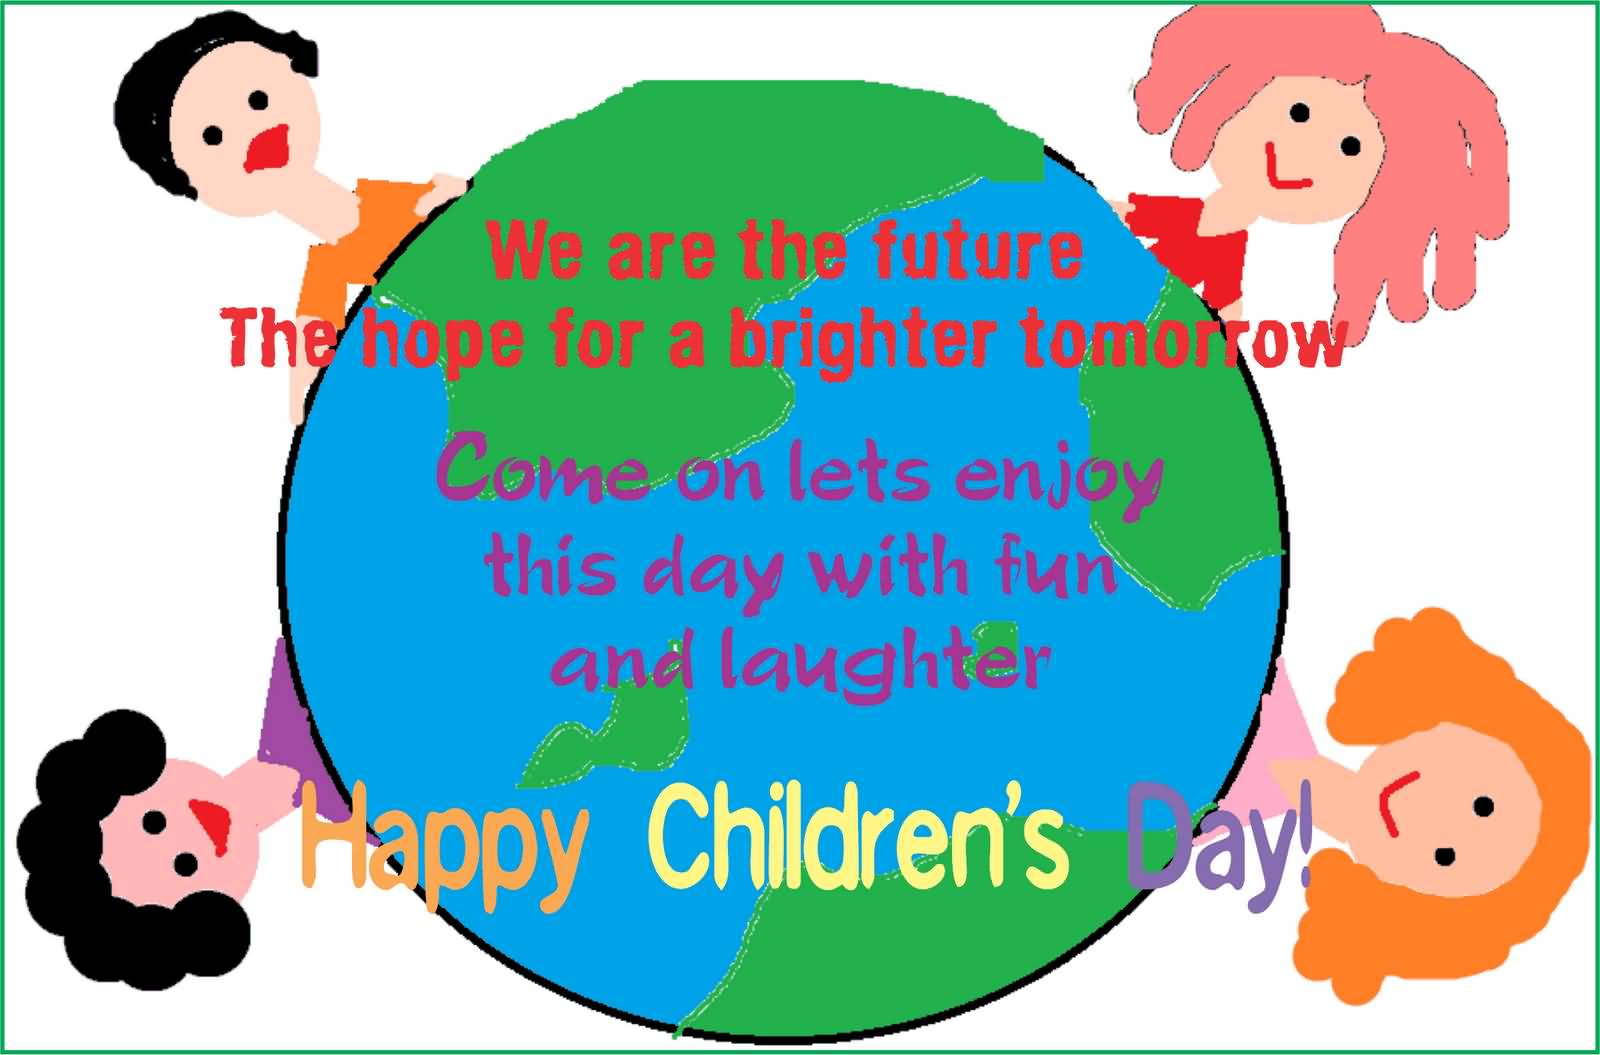 We Are The Future The Hooe For A Brighter Tomorrow Happy Children's Day 2016